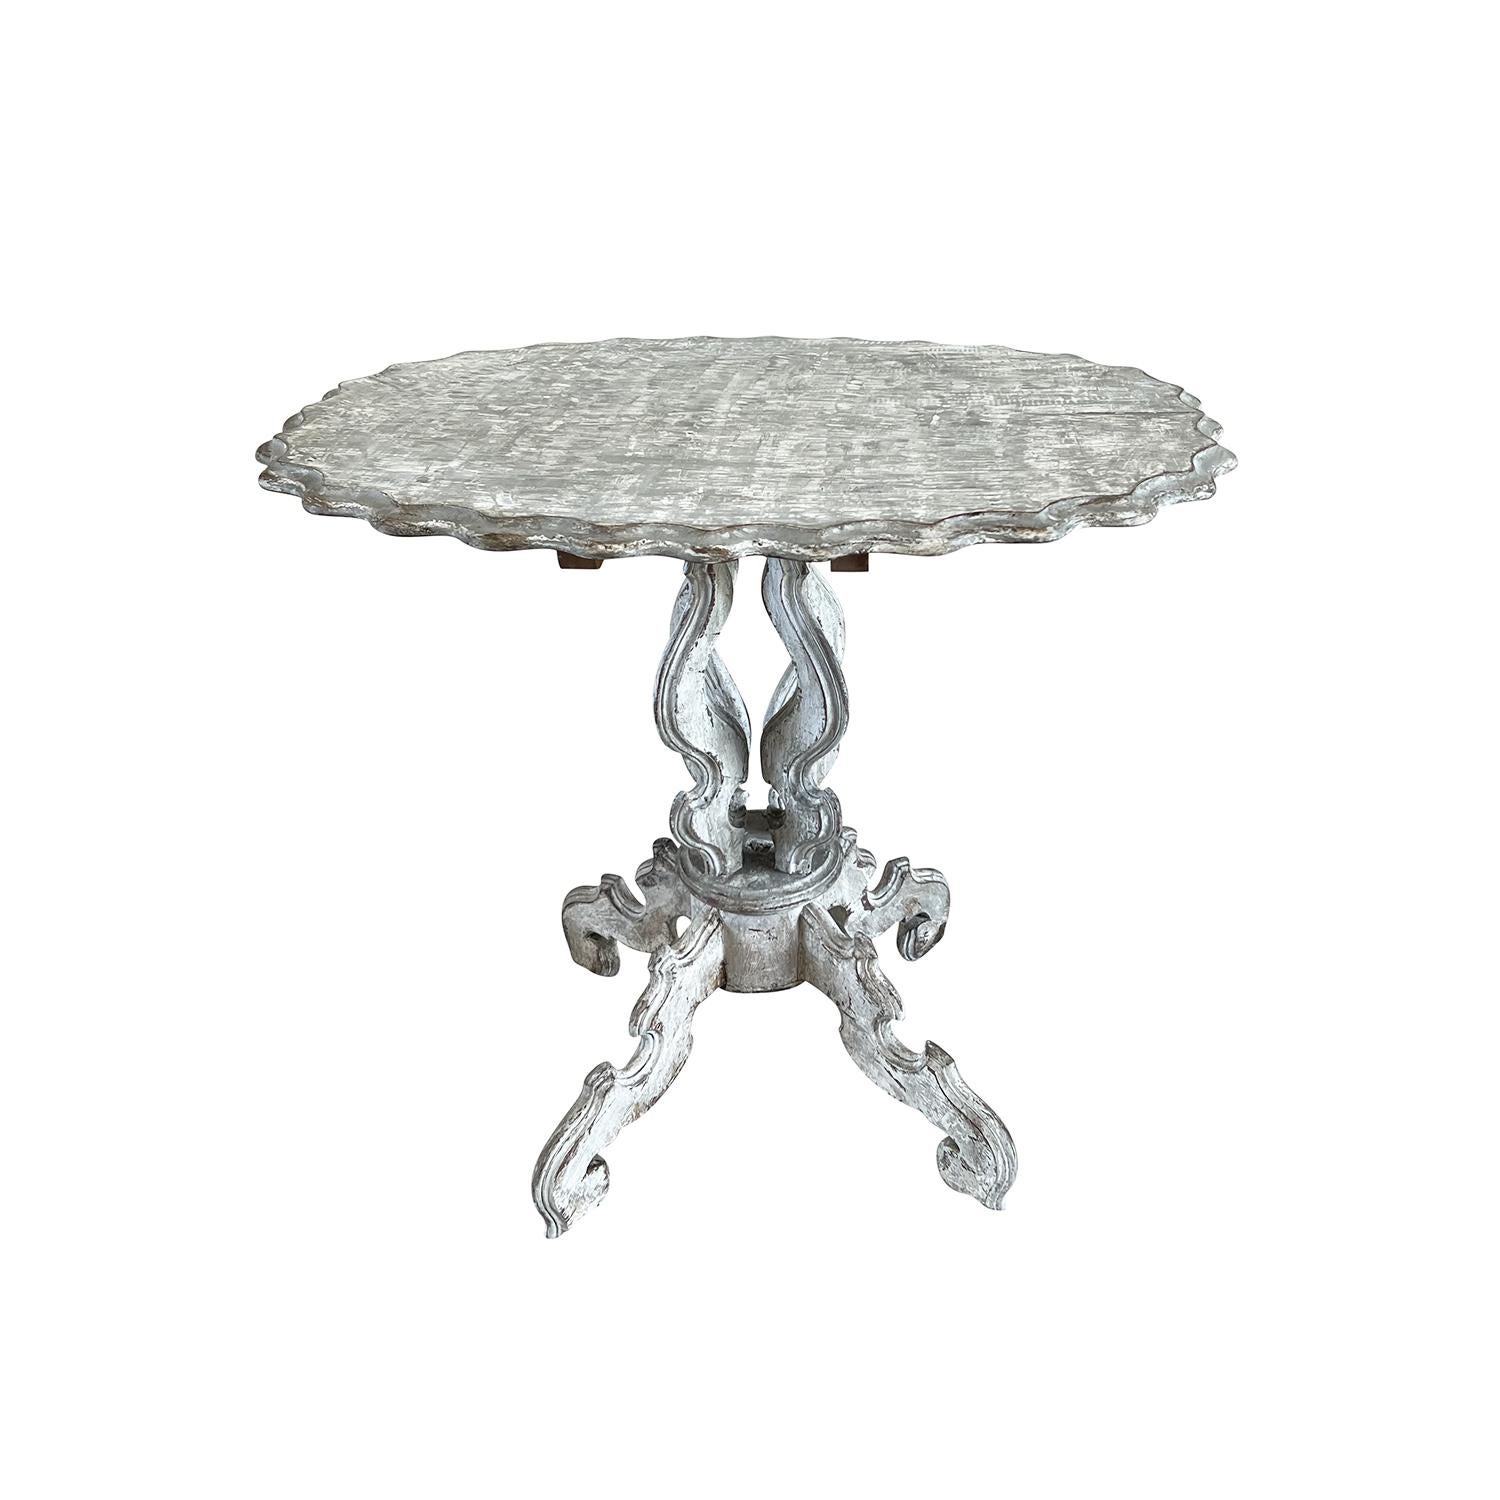 An original, antique French Gueridon table from the Napoleon III period. The painted Pinewood side table has a very decorative scalloped edge and elegantly carved base with four legs. In original condition with visible wear and heavy patina. Wear